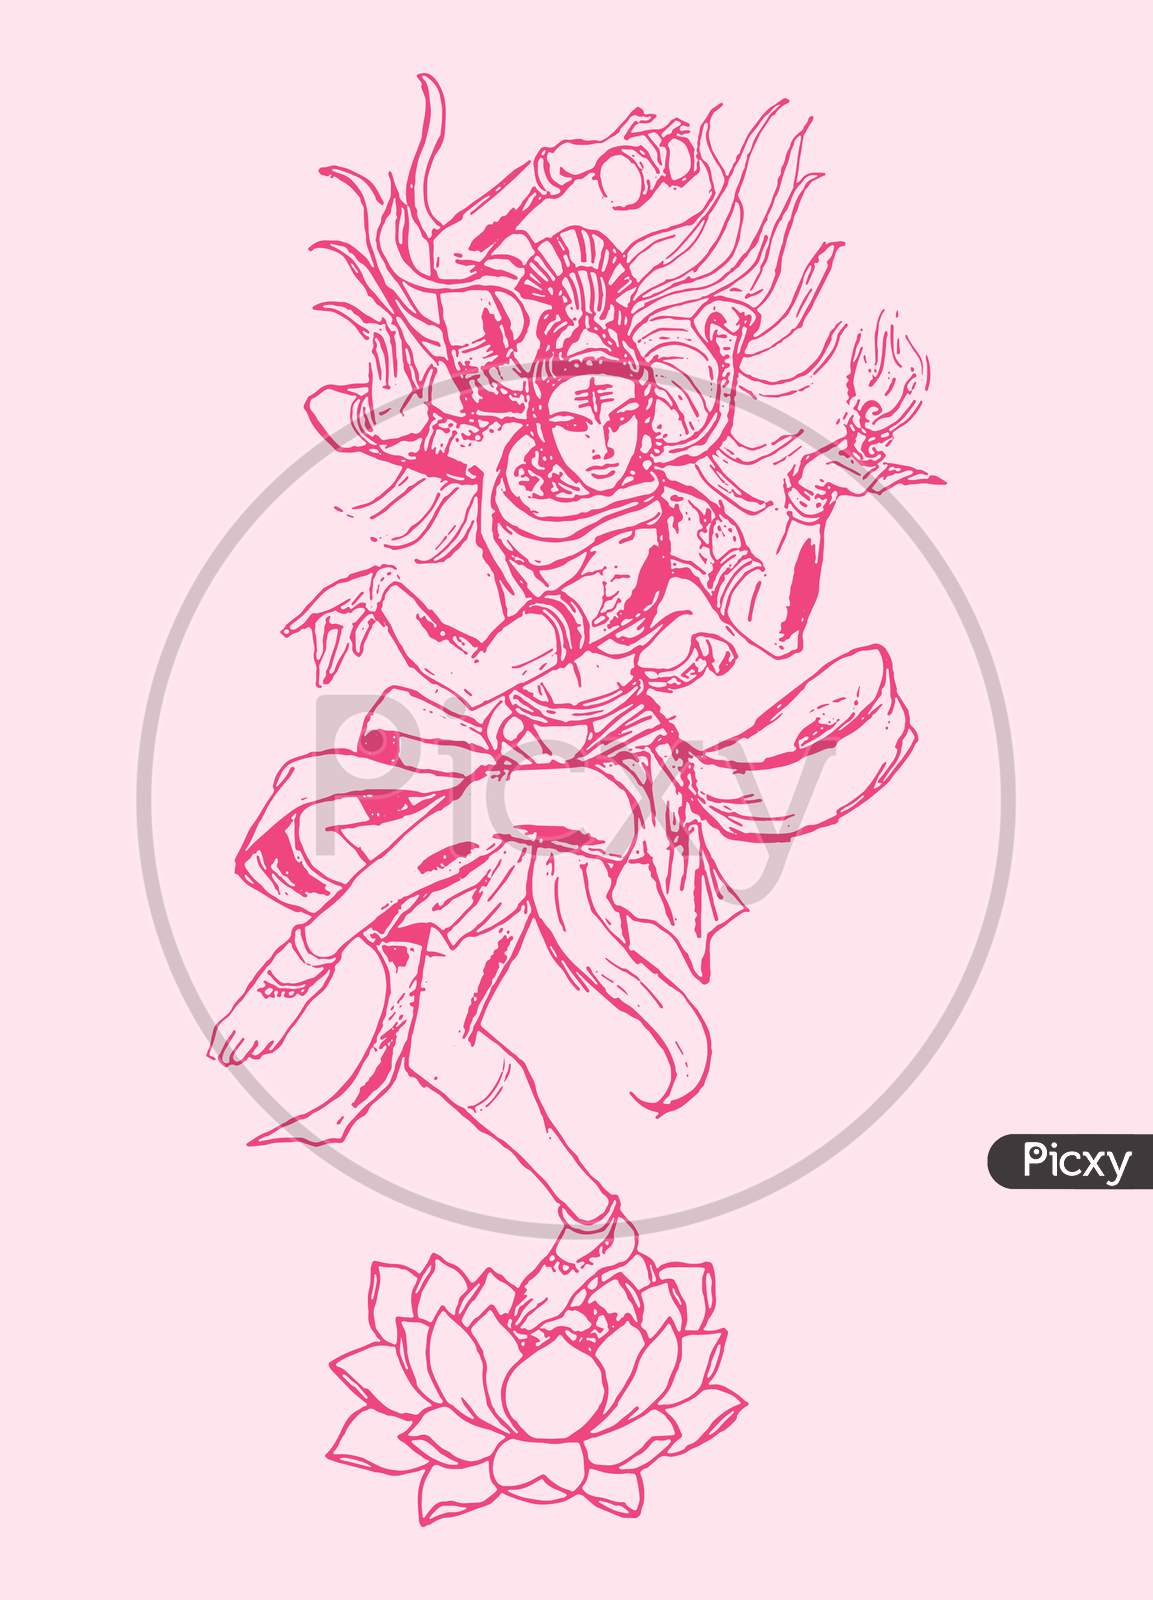 Image of Sketch of Indian famous and powerful god Lord Shiva and ...